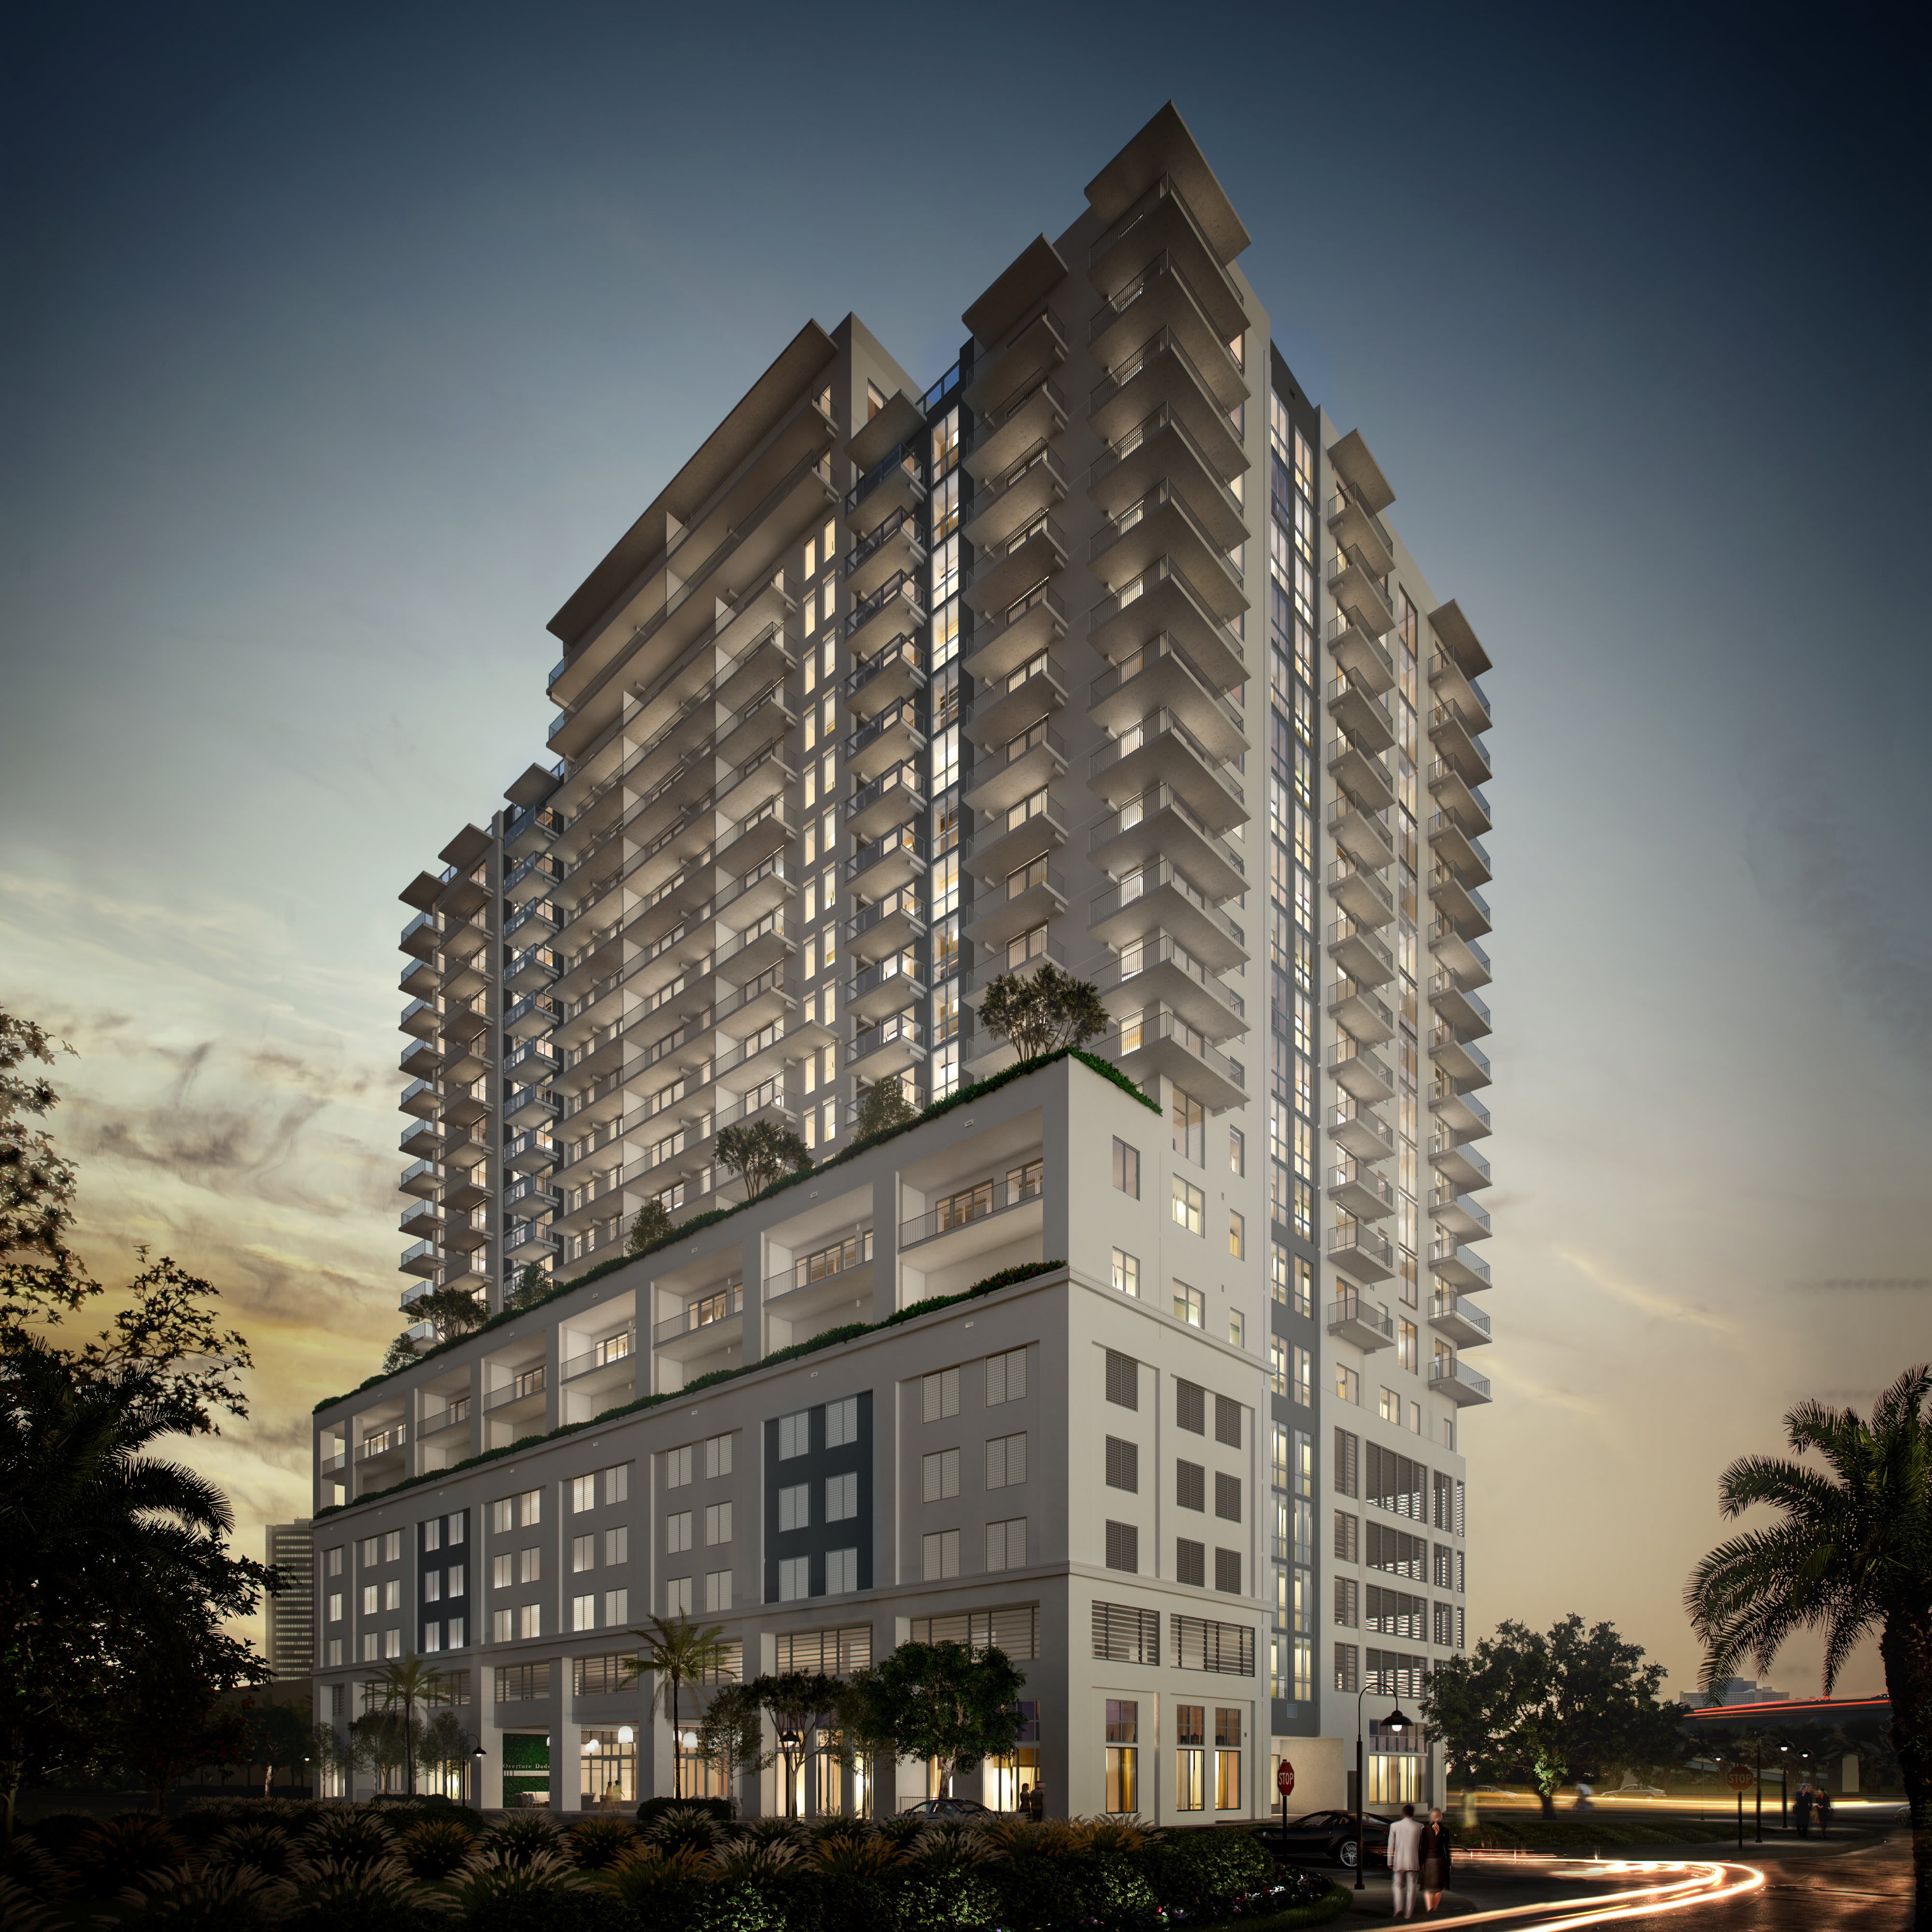 Overture Dadeland (not active) community exterior